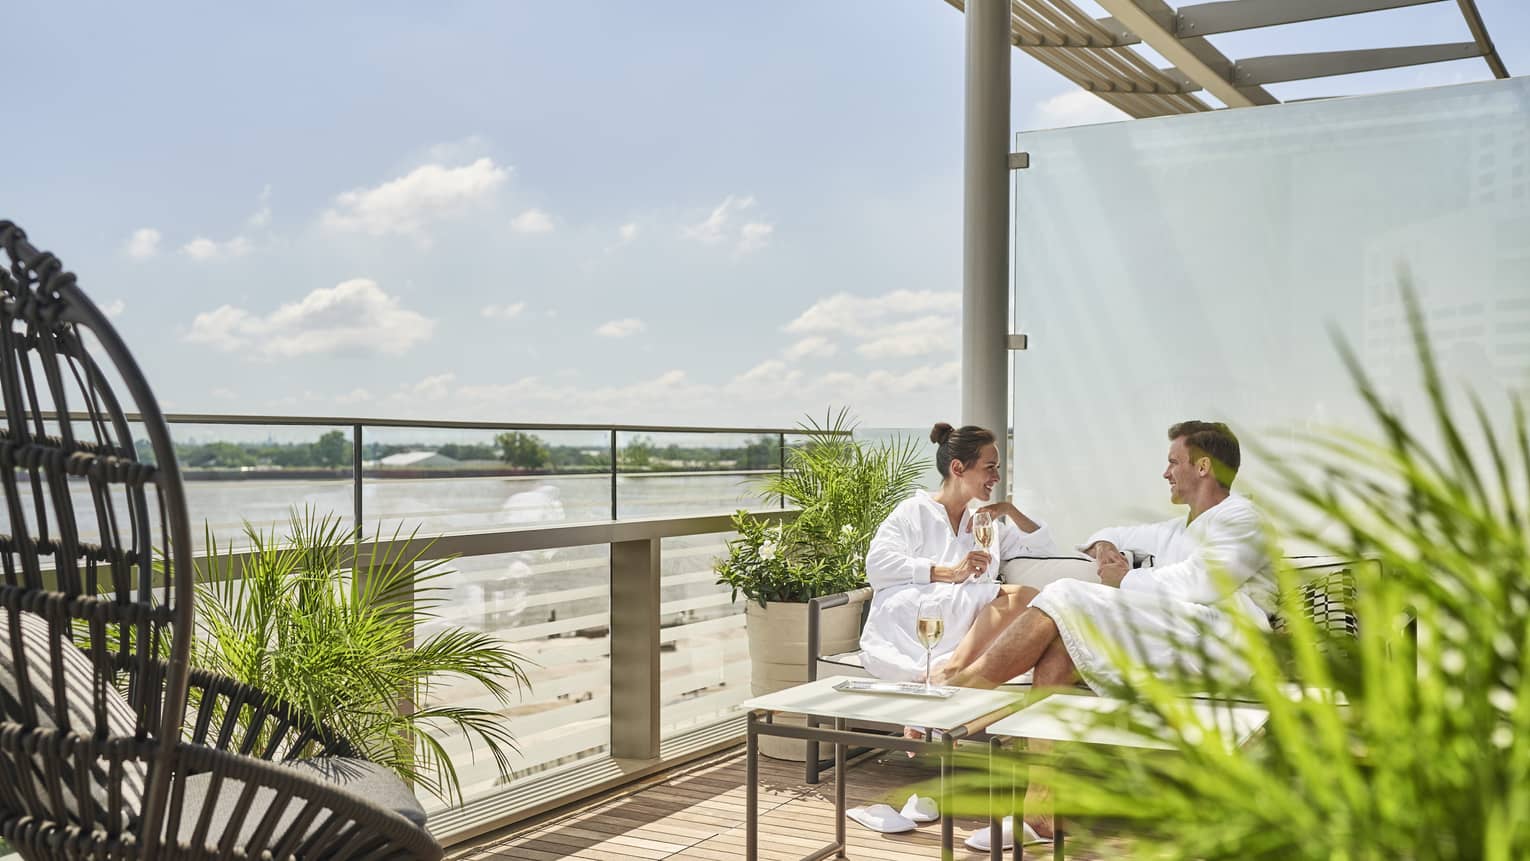 A man and woman in spa robes sitting on a patio with plants.